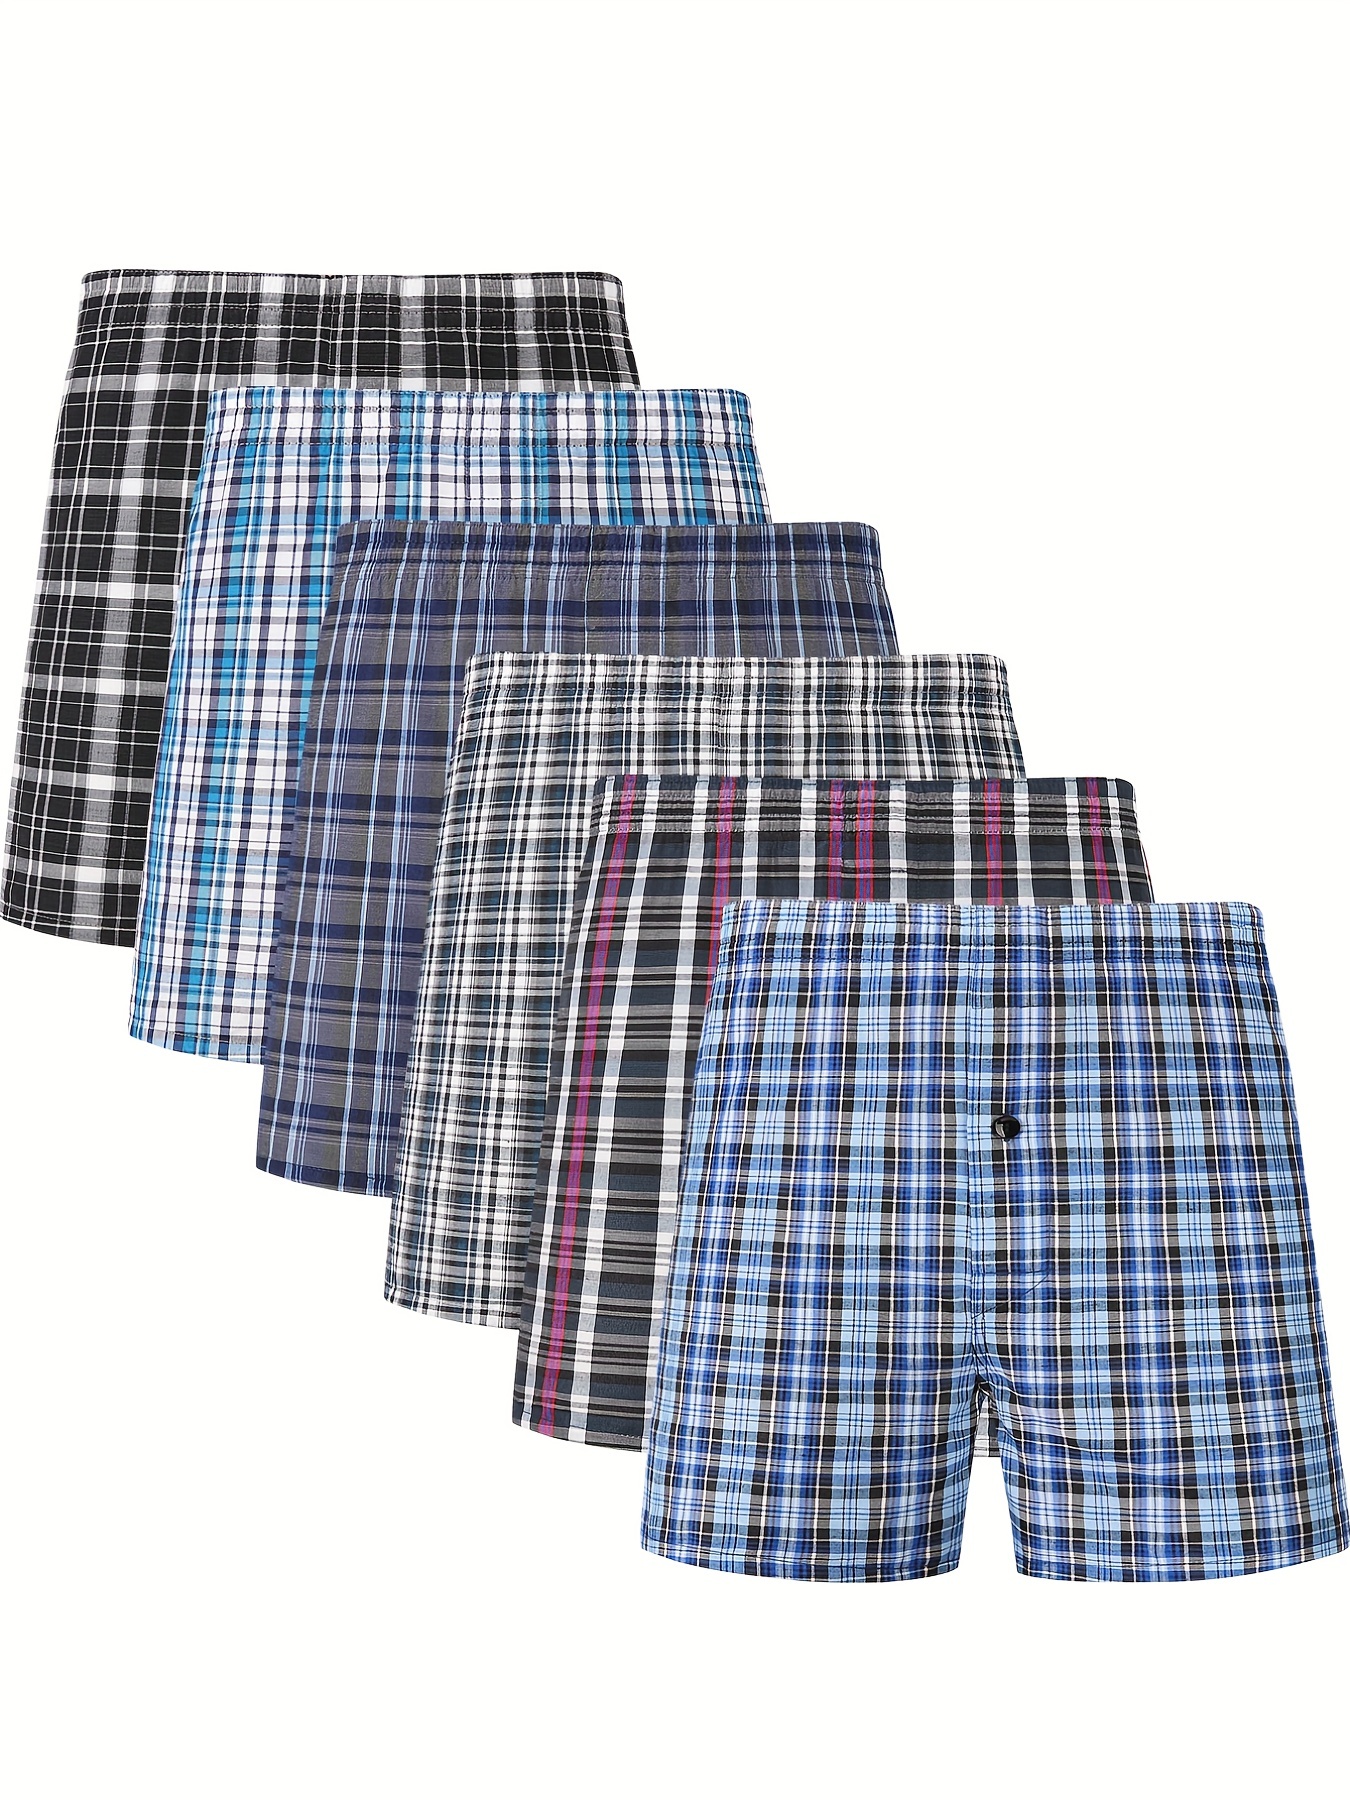 WOVEN SMALL PATTERNED TRUNKS